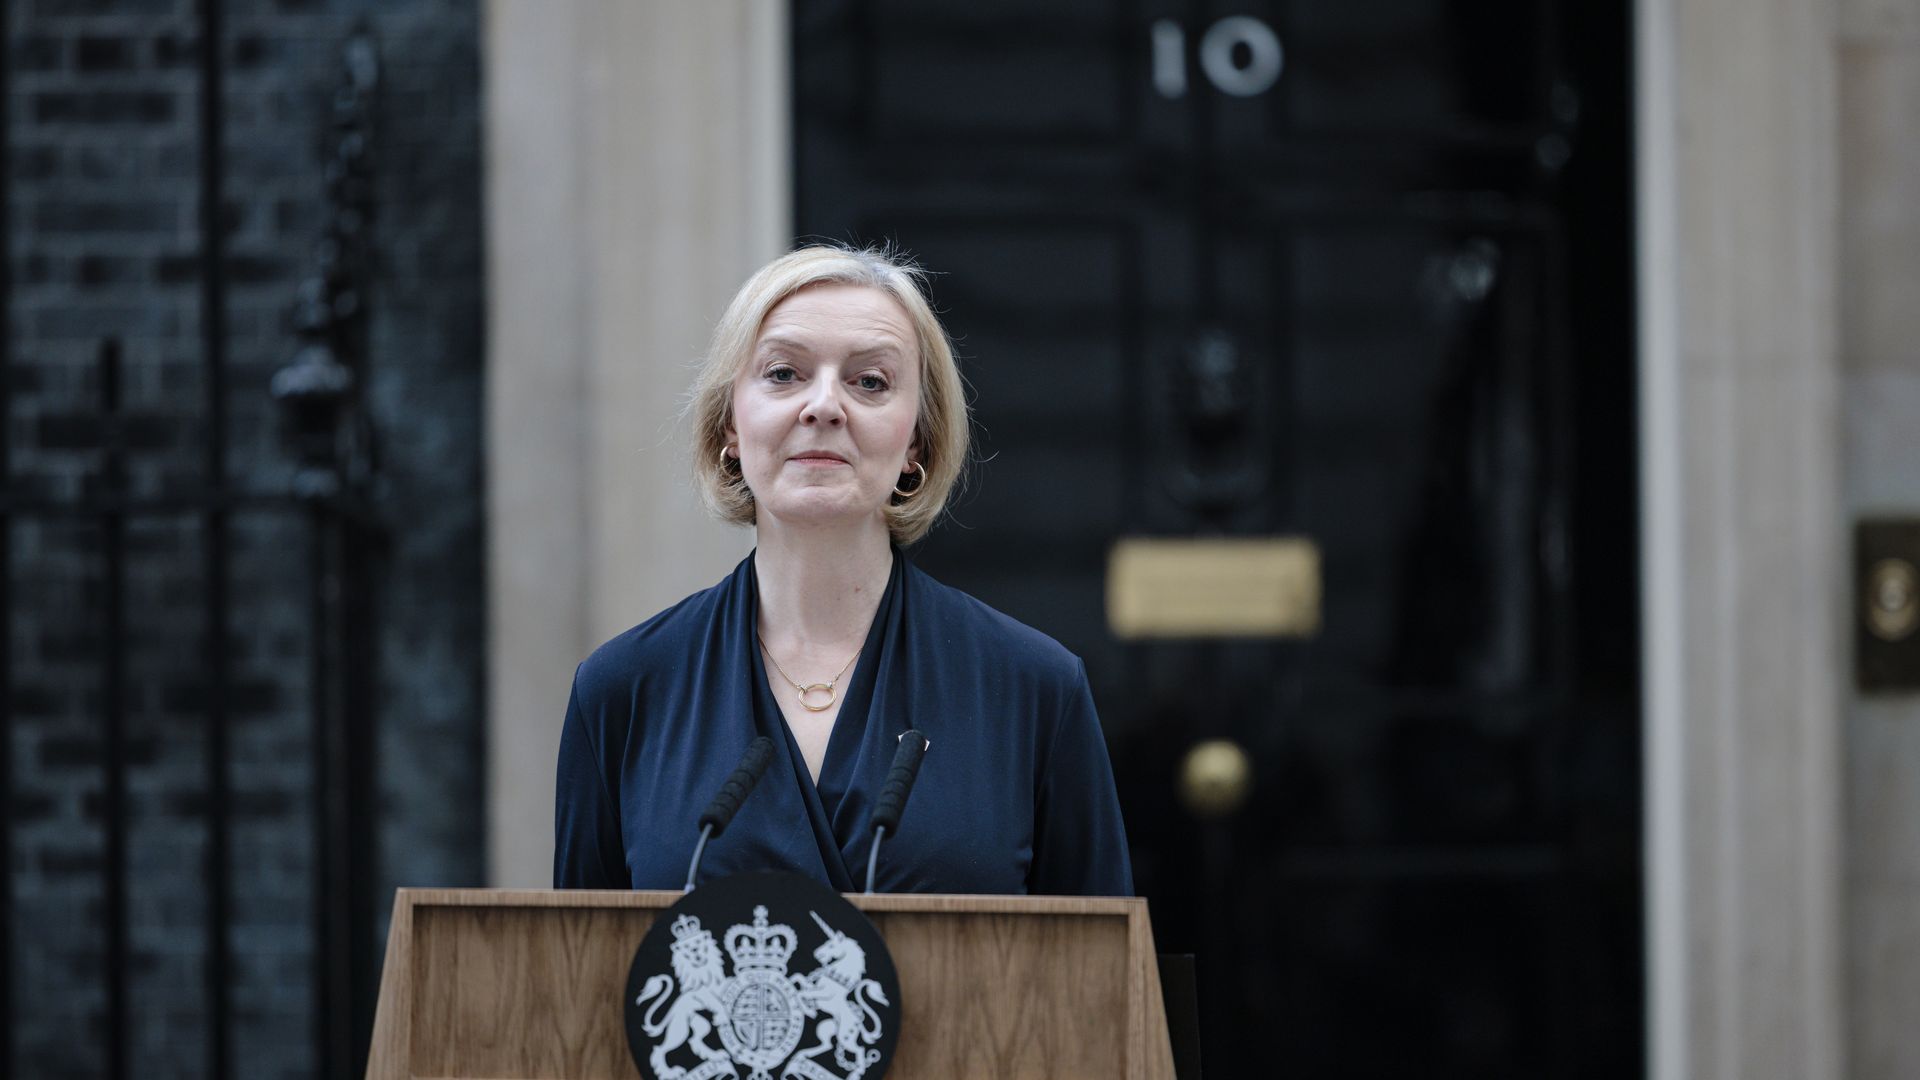 Liz Truss delivers her resignation speech at Downing Street on Thursday.